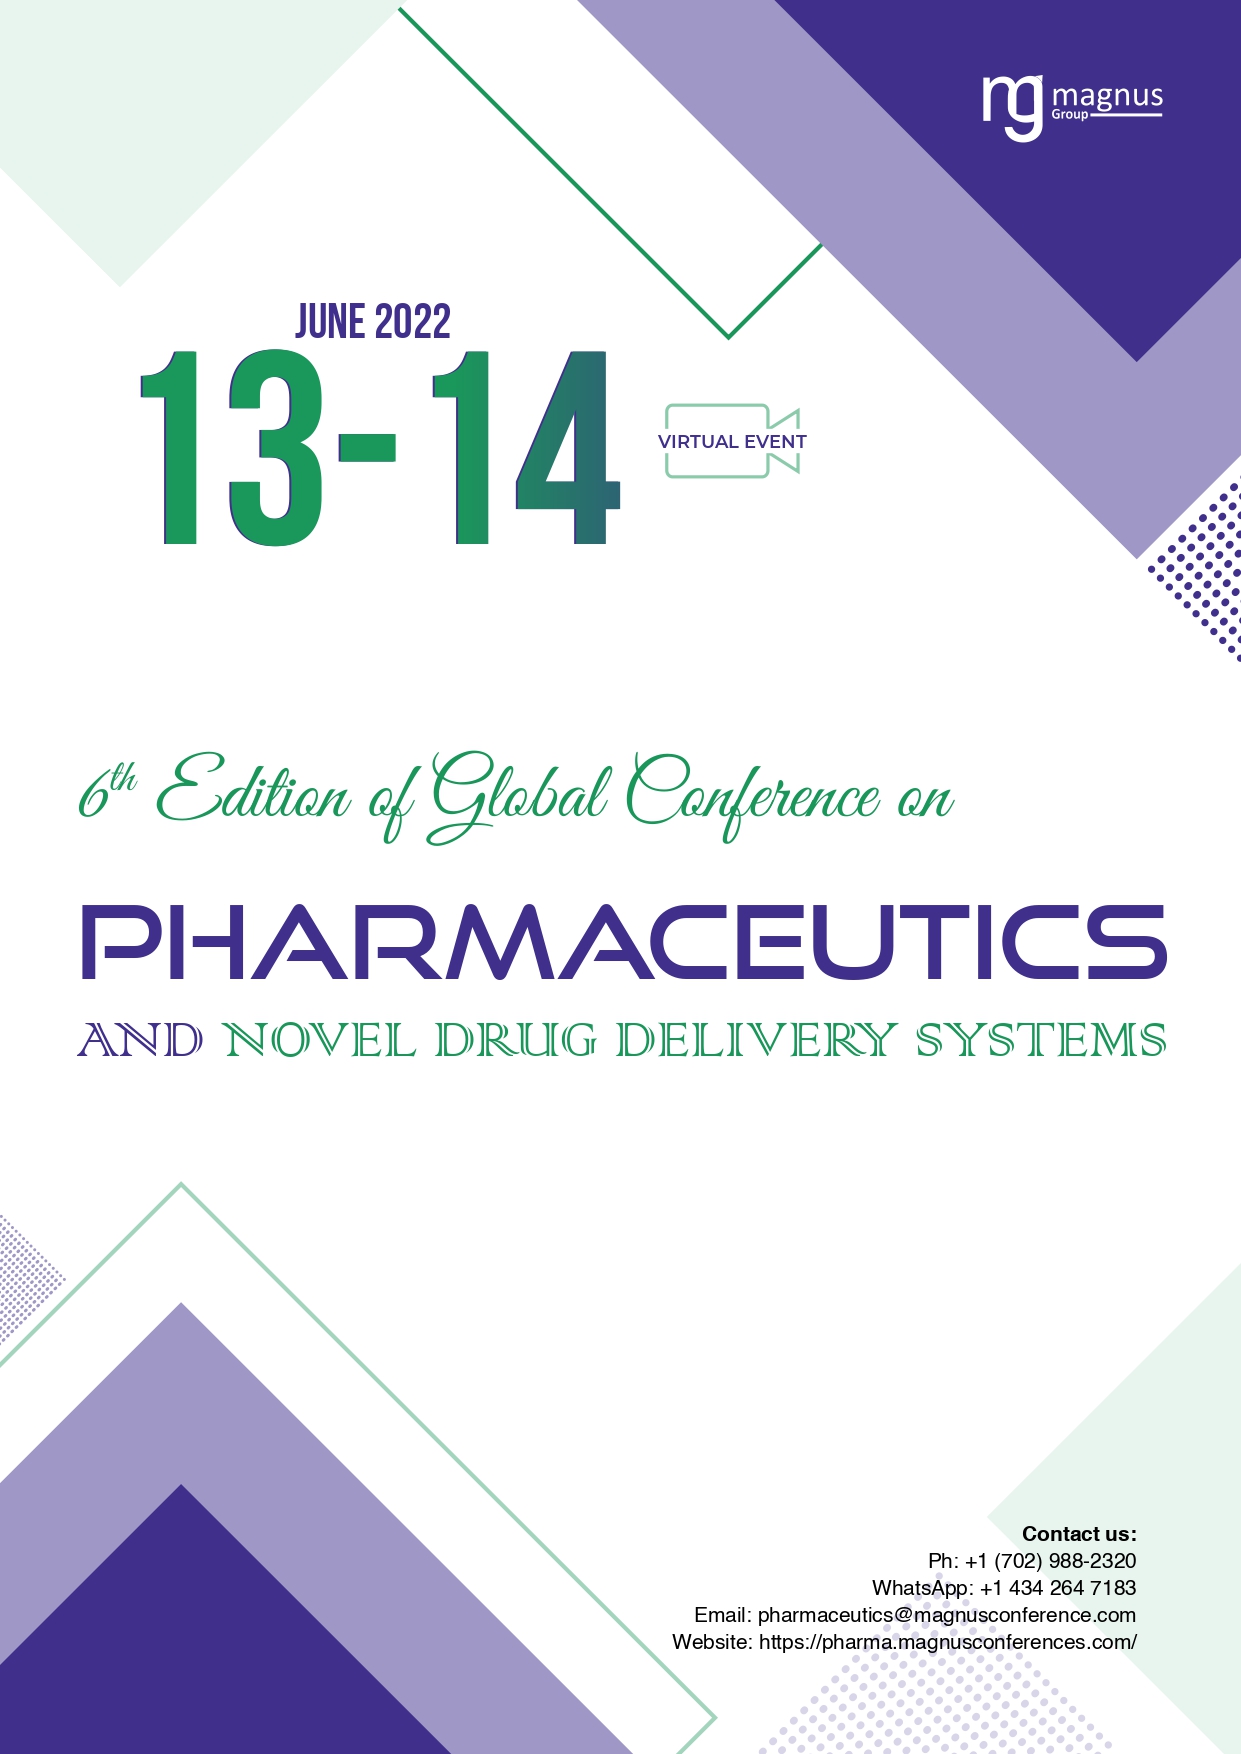 6th Edition of Global Conference on Pharmaceutics and Novel Drug Delivery Systems Book